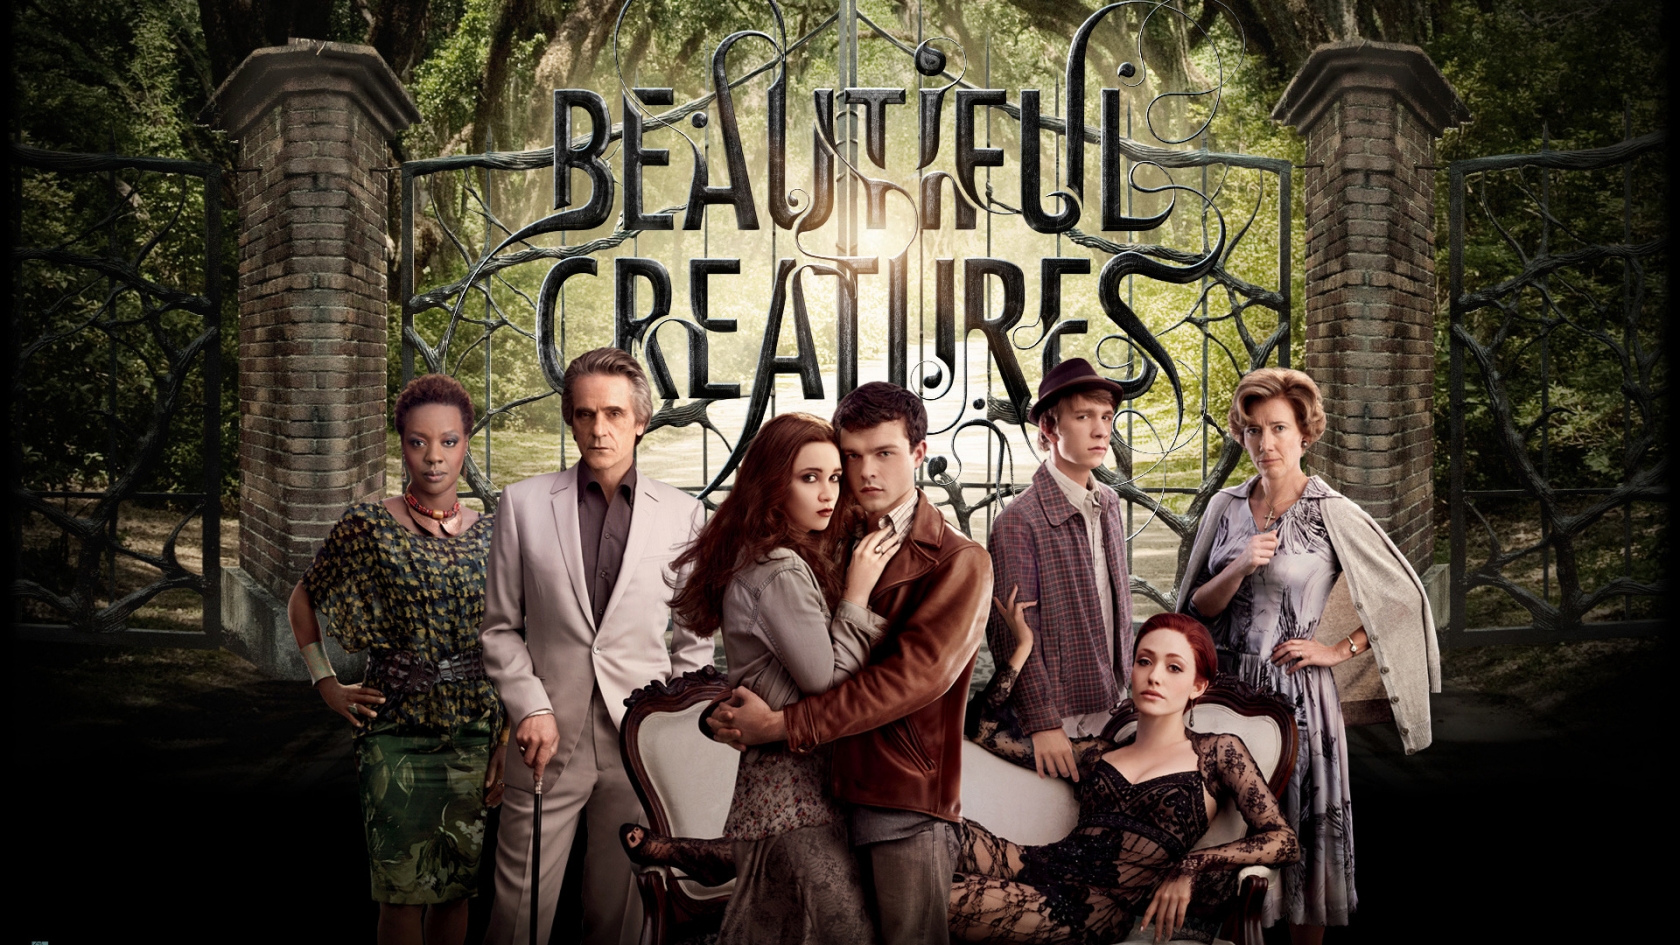 Beautiful Creatures Cast for 1680 x 945 HDTV resolution